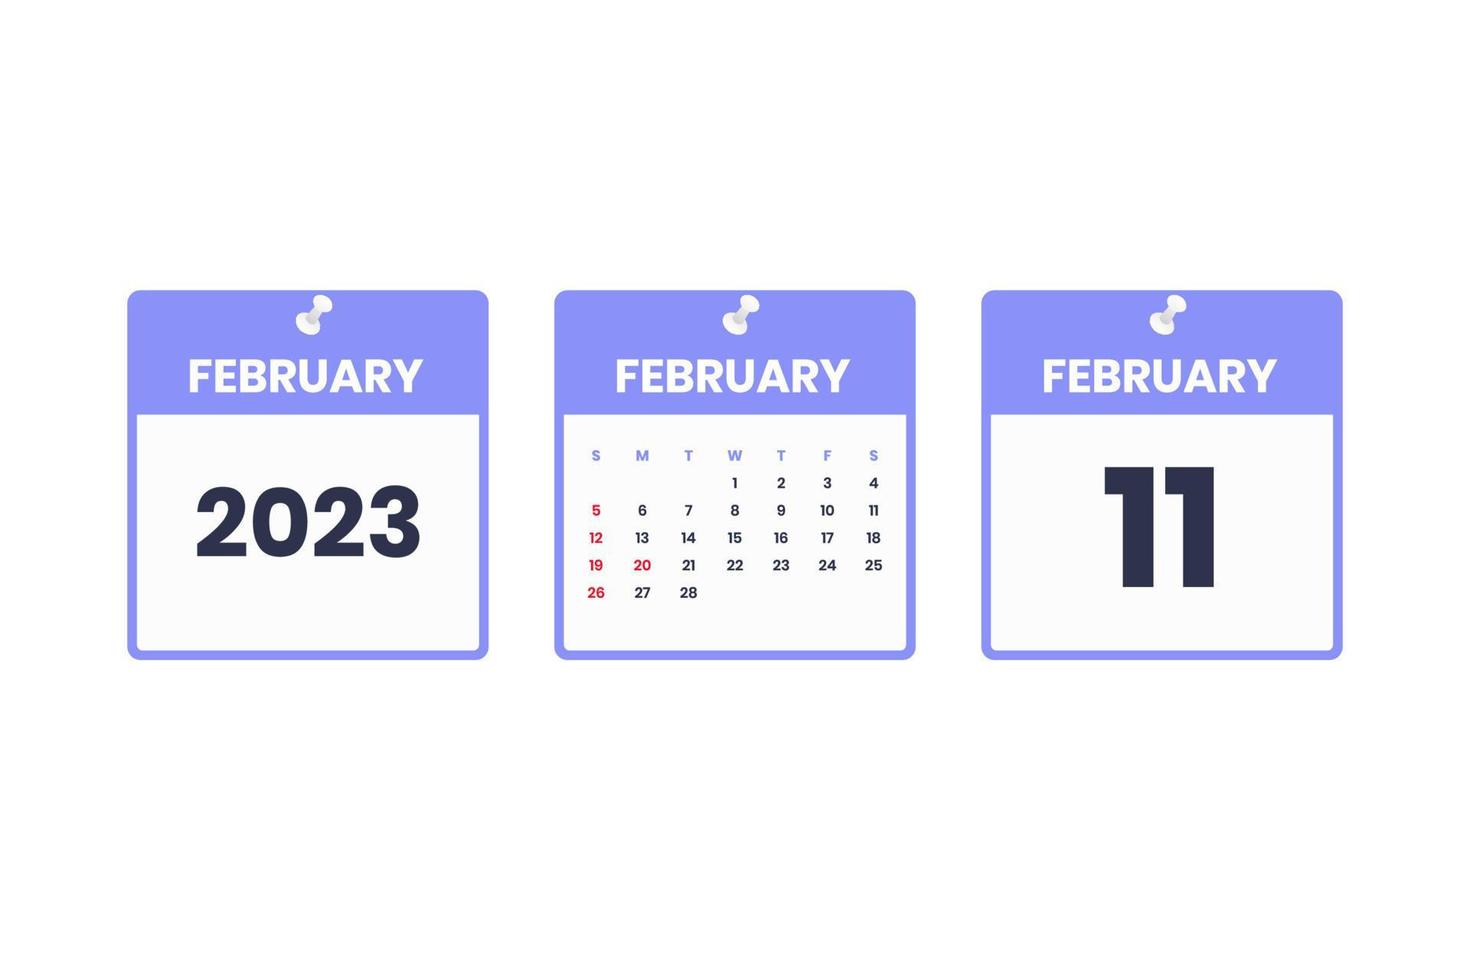 February calendar design. February 11 2023 calendar icon for schedule, appointment, important date concept vector